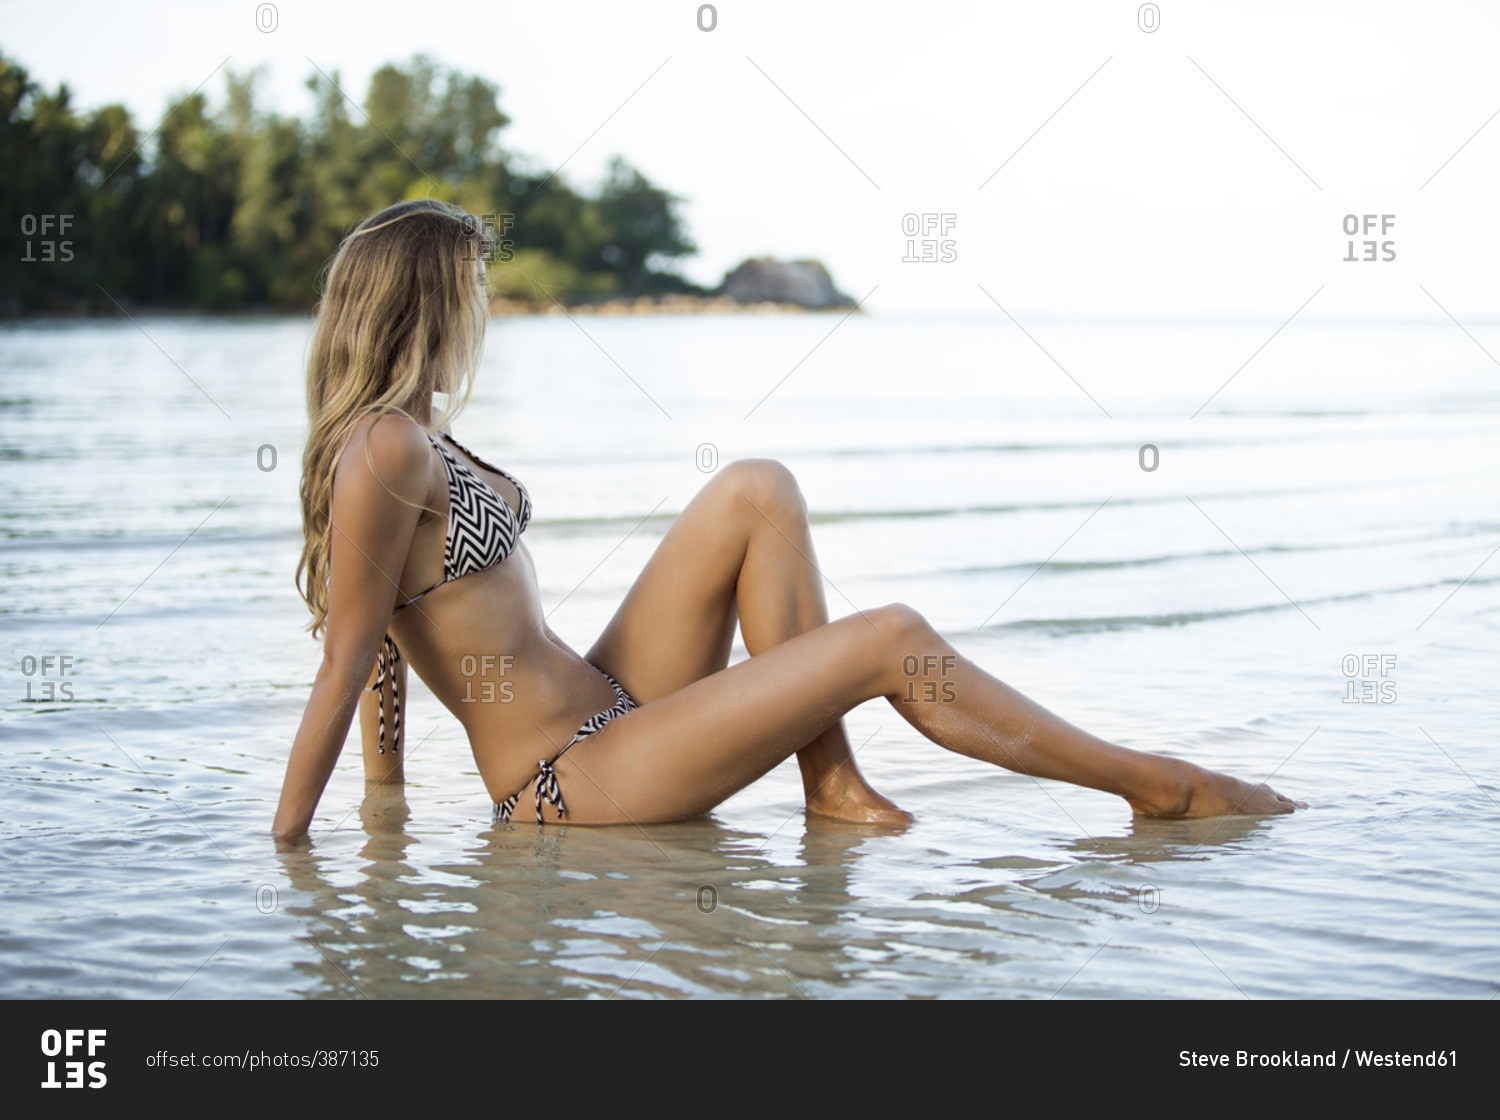 Thailand, woman sitting in shallow water